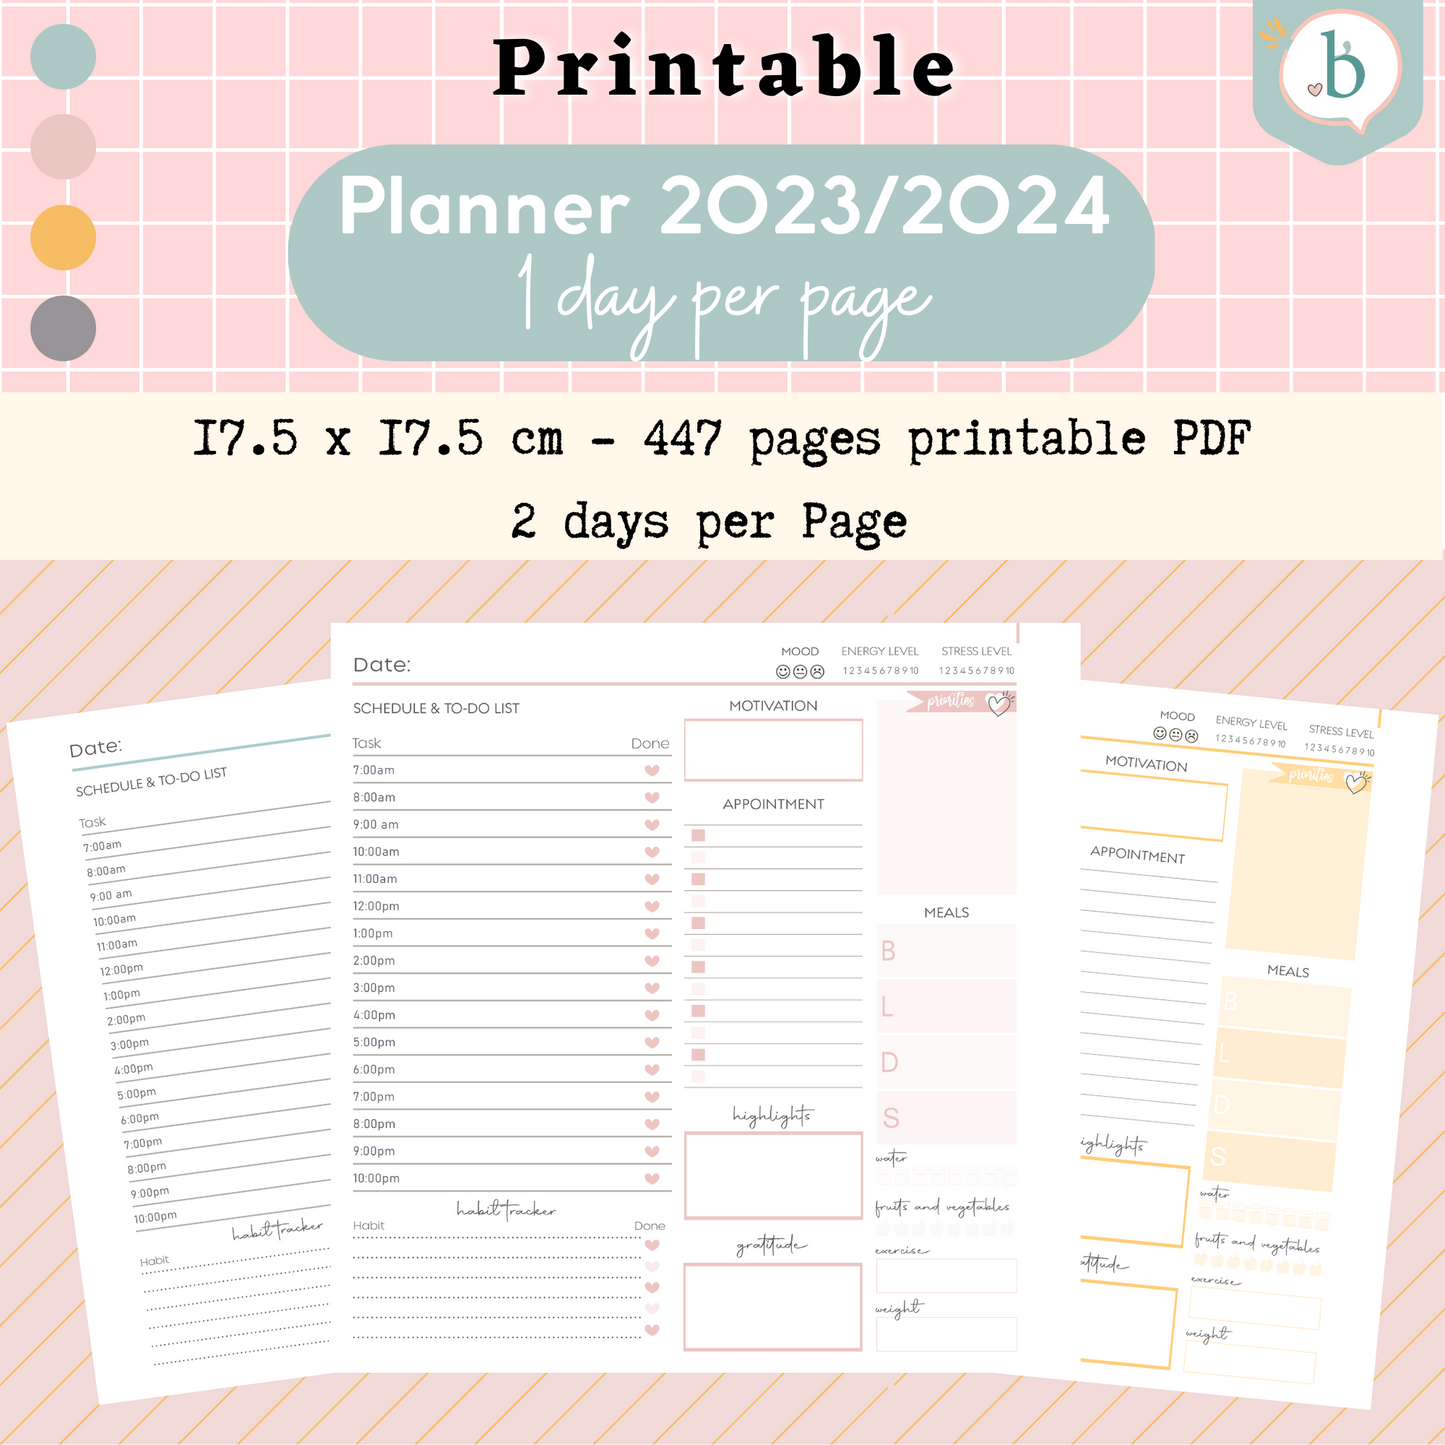 Ultimate Meaningful Life Planner 2023 2024